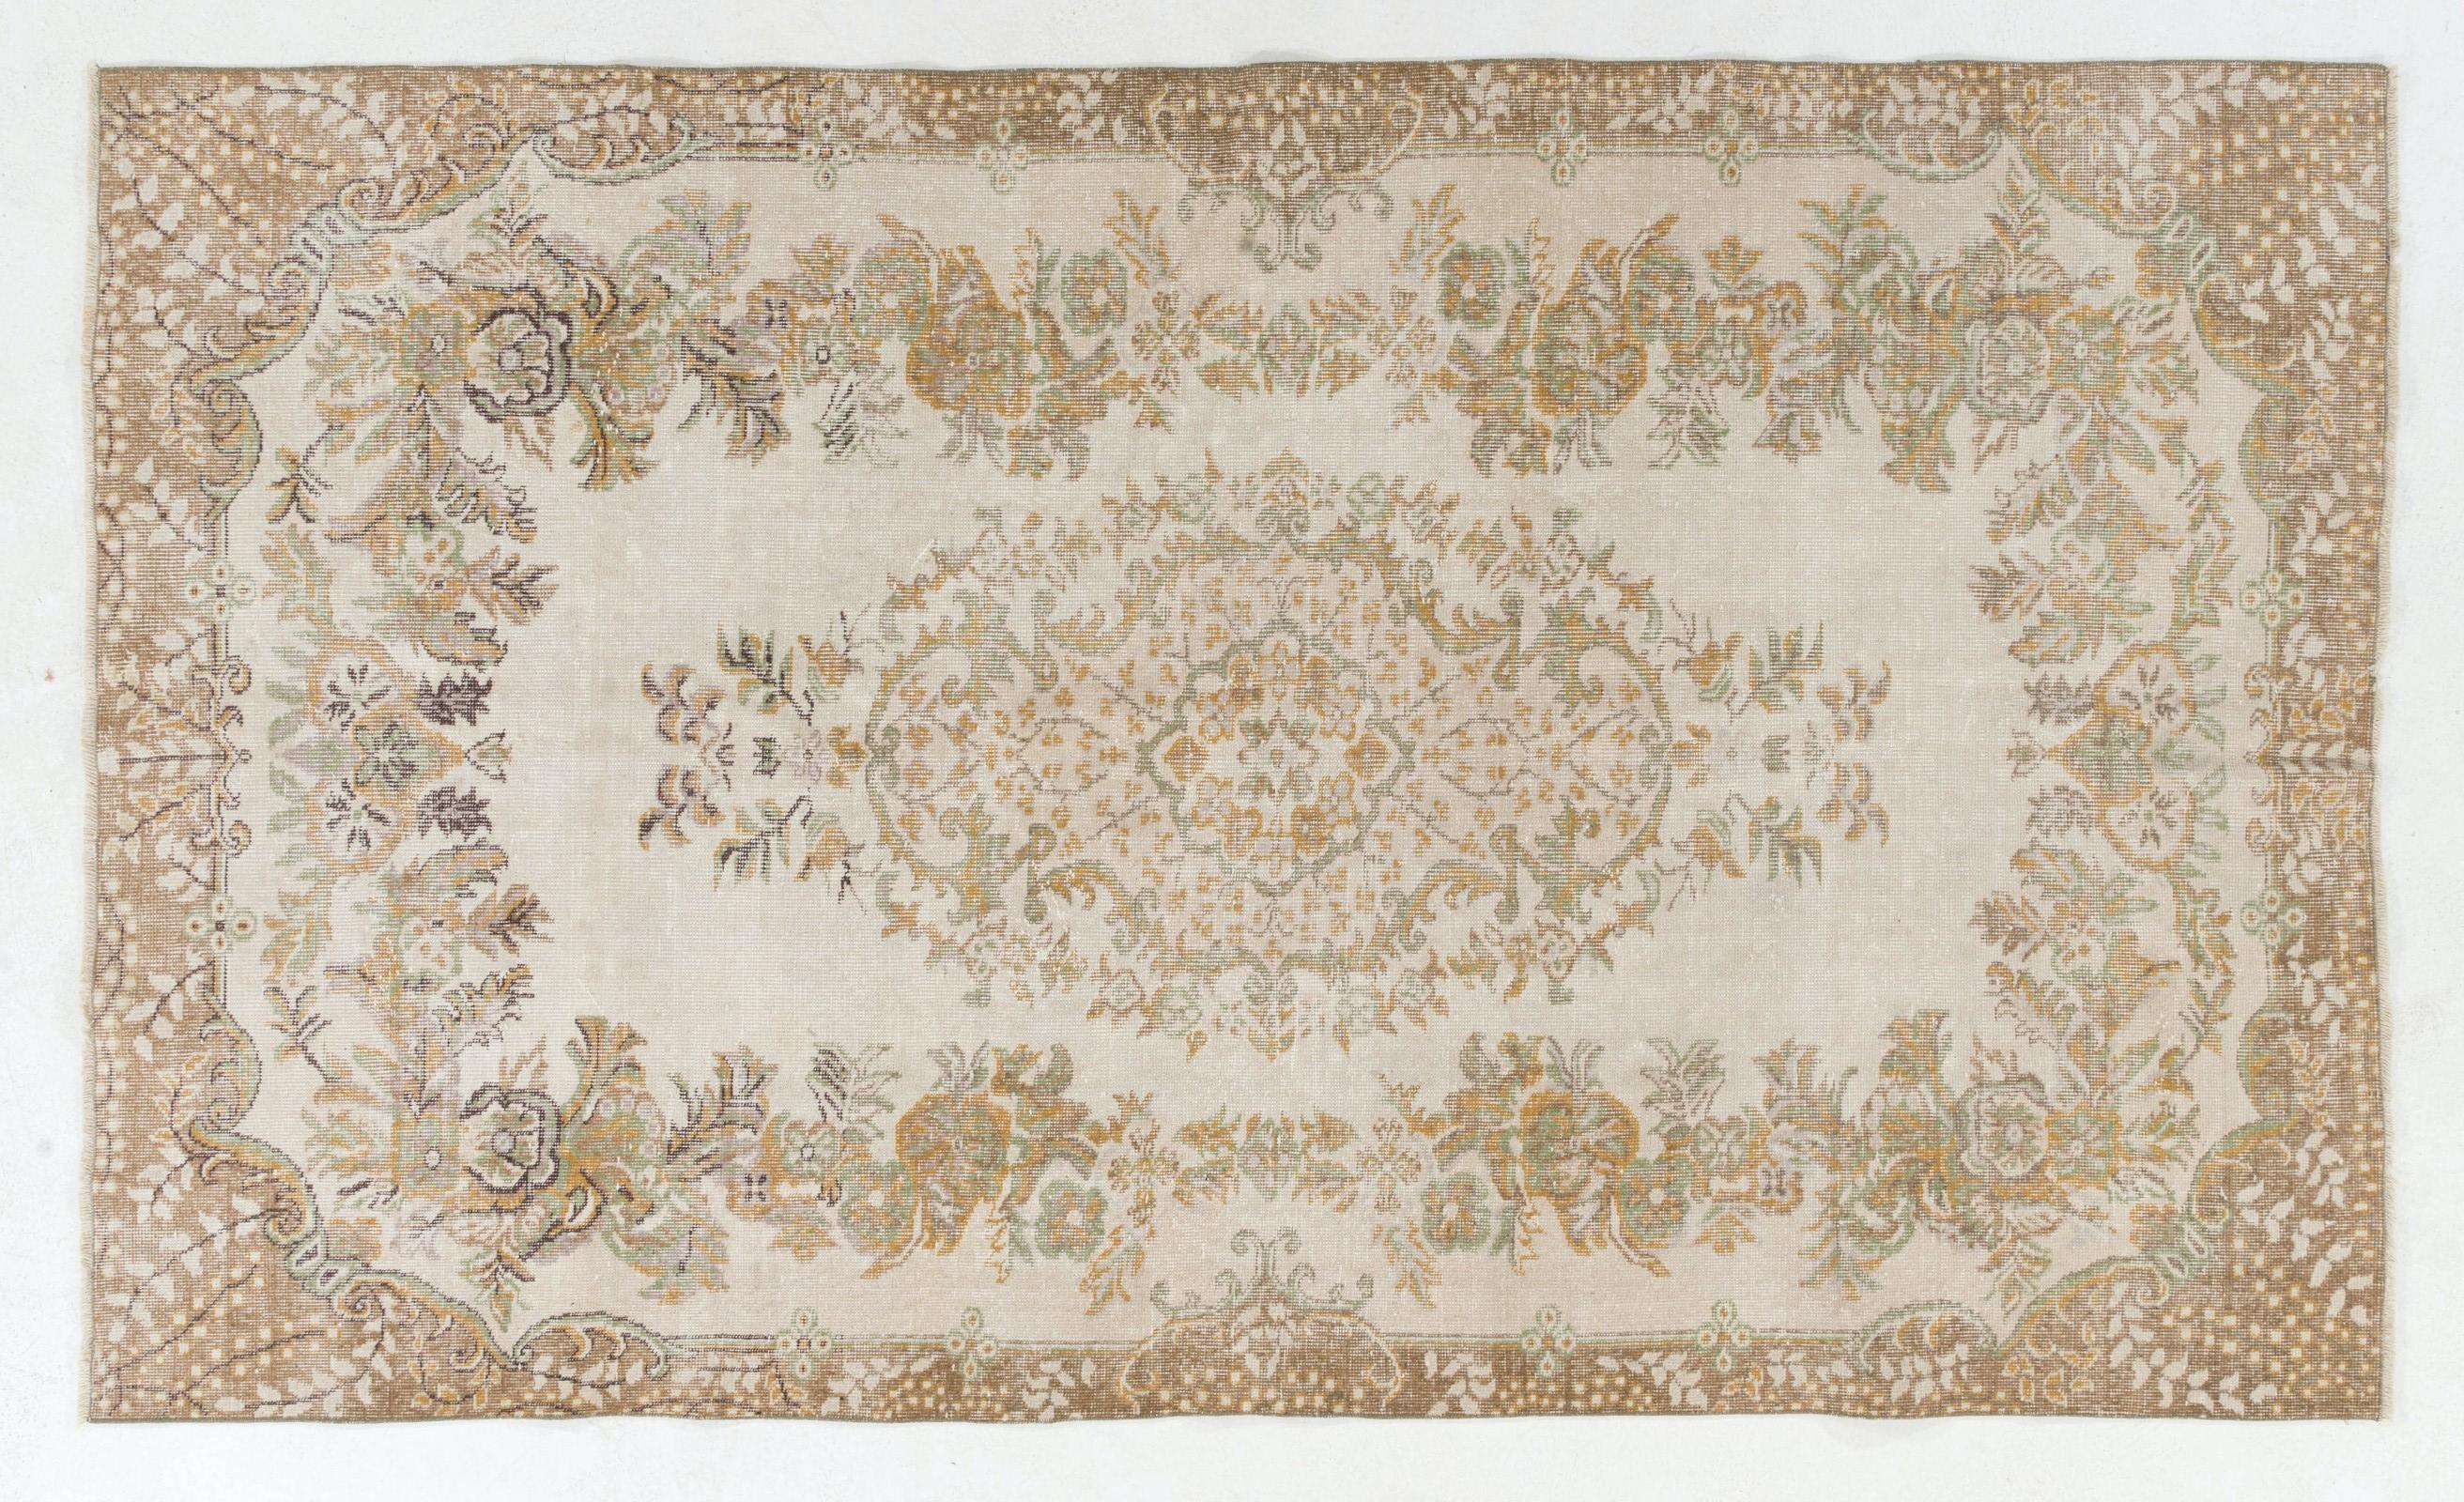 Hand-Knotted Vintage Anatolian Area Rug with Floral Medallion Design In Good Condition For Sale In Philadelphia, PA